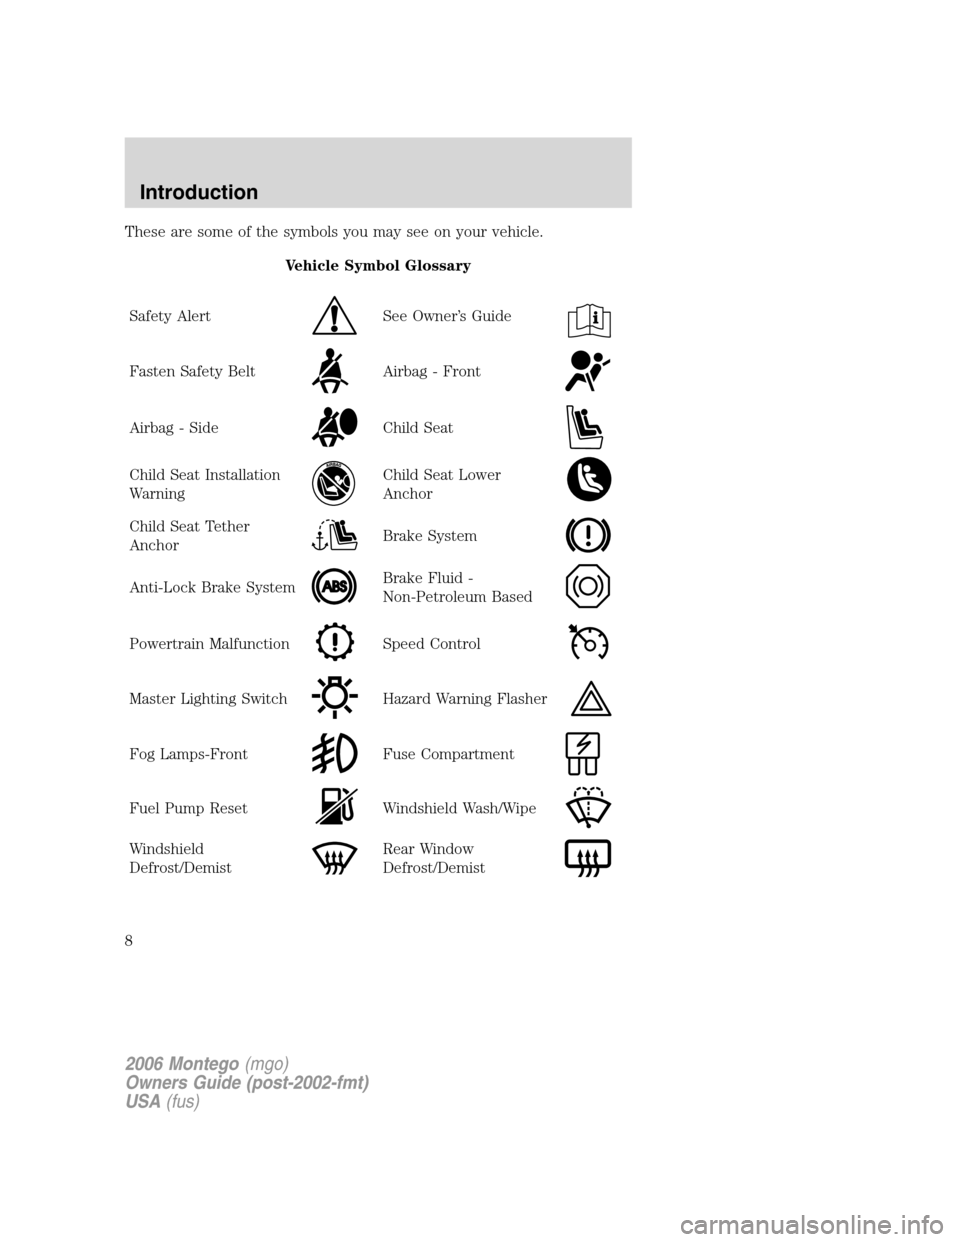 Mercury Montego 2006  Owners Manuals These are some of the symbols you may see on your vehicle.
Vehicle Symbol Glossary
Safety Alert
See Owner’s Guide
Fasten Safety BeltAirbag - Front
Airbag - SideChild Seat
Child Seat Installation
War